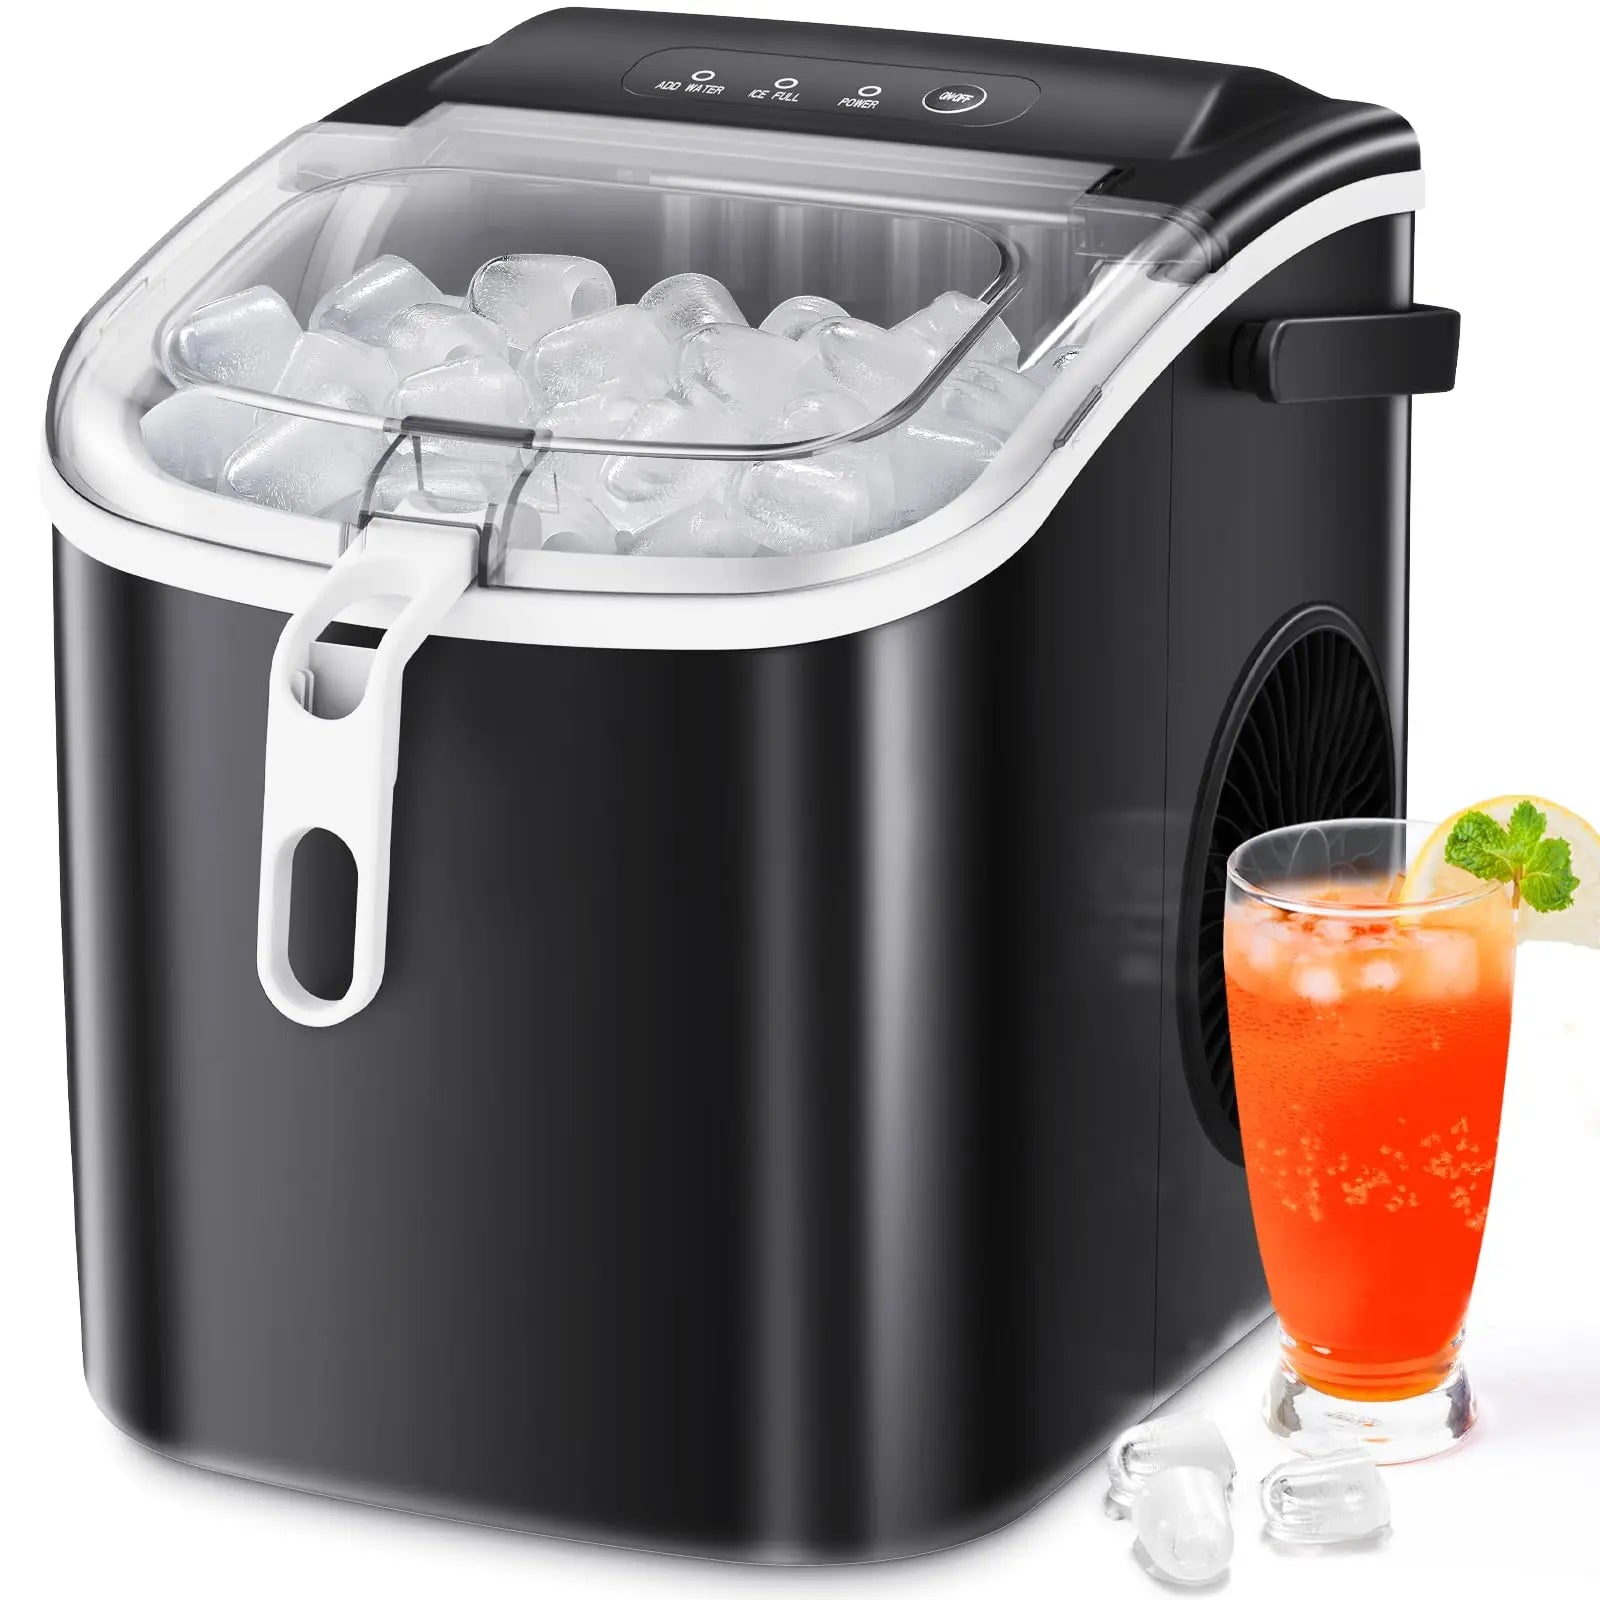 KISSAIR Countertop Ice Maker Machine 6-Minute Fast Bullet Ice Simple Handle Automatic Cleaning Suitable for Household Small Student Dormitory and Bar Party